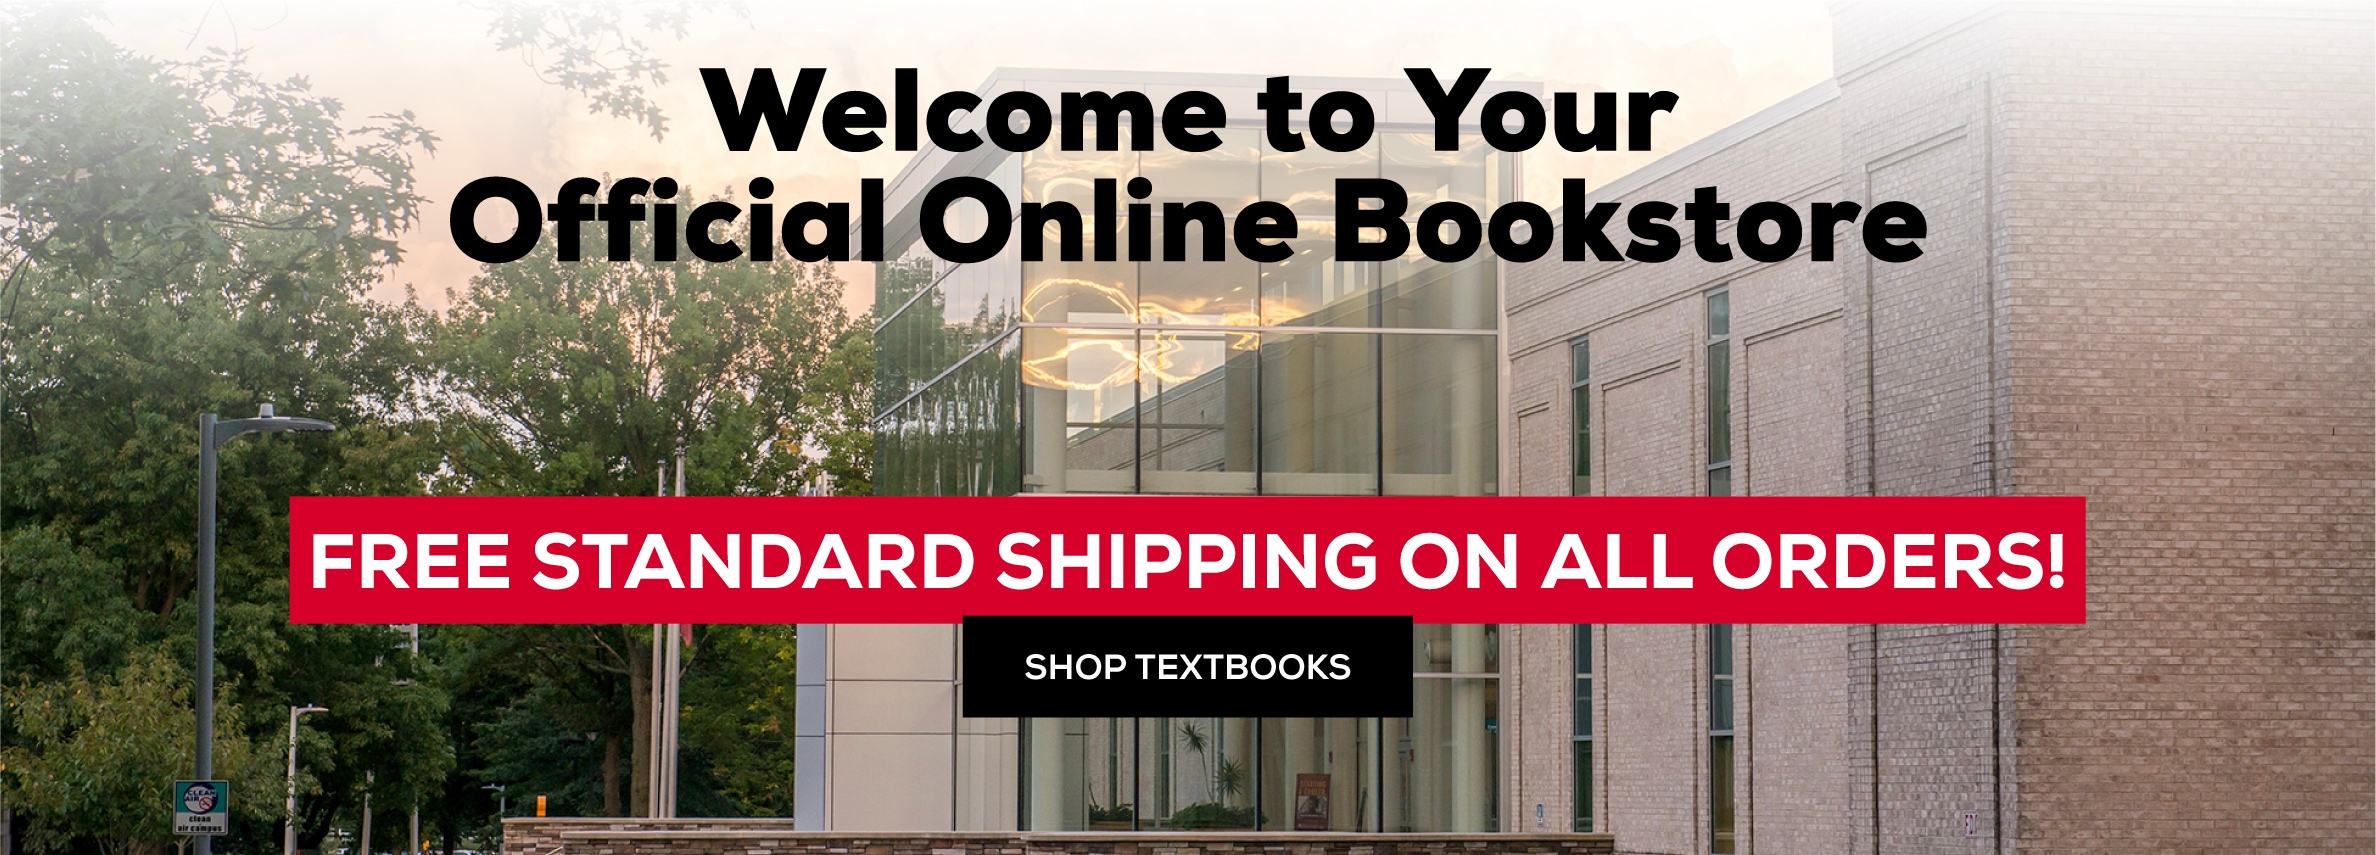 Welcome to Your Official Online Bookstore - Free Standard Shipping on All Orders! Shop Textbooks